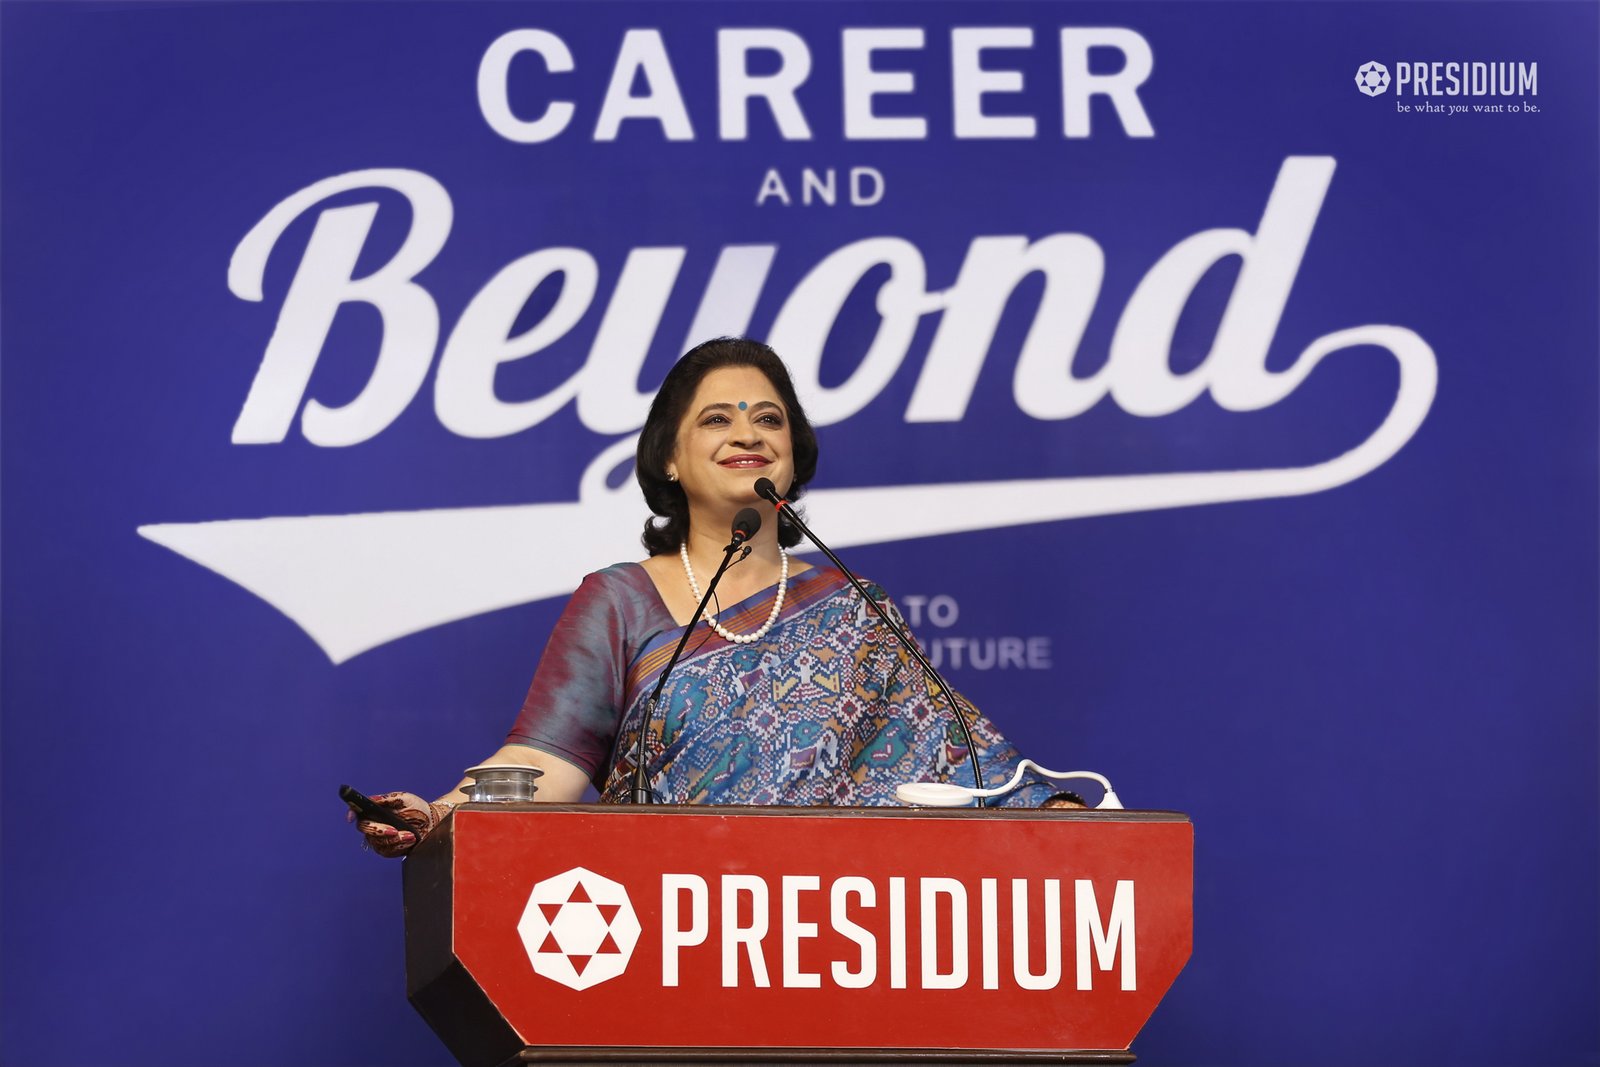 CAREER & BEYOND  SHAPING PRESIDIANS FOR FUTURE